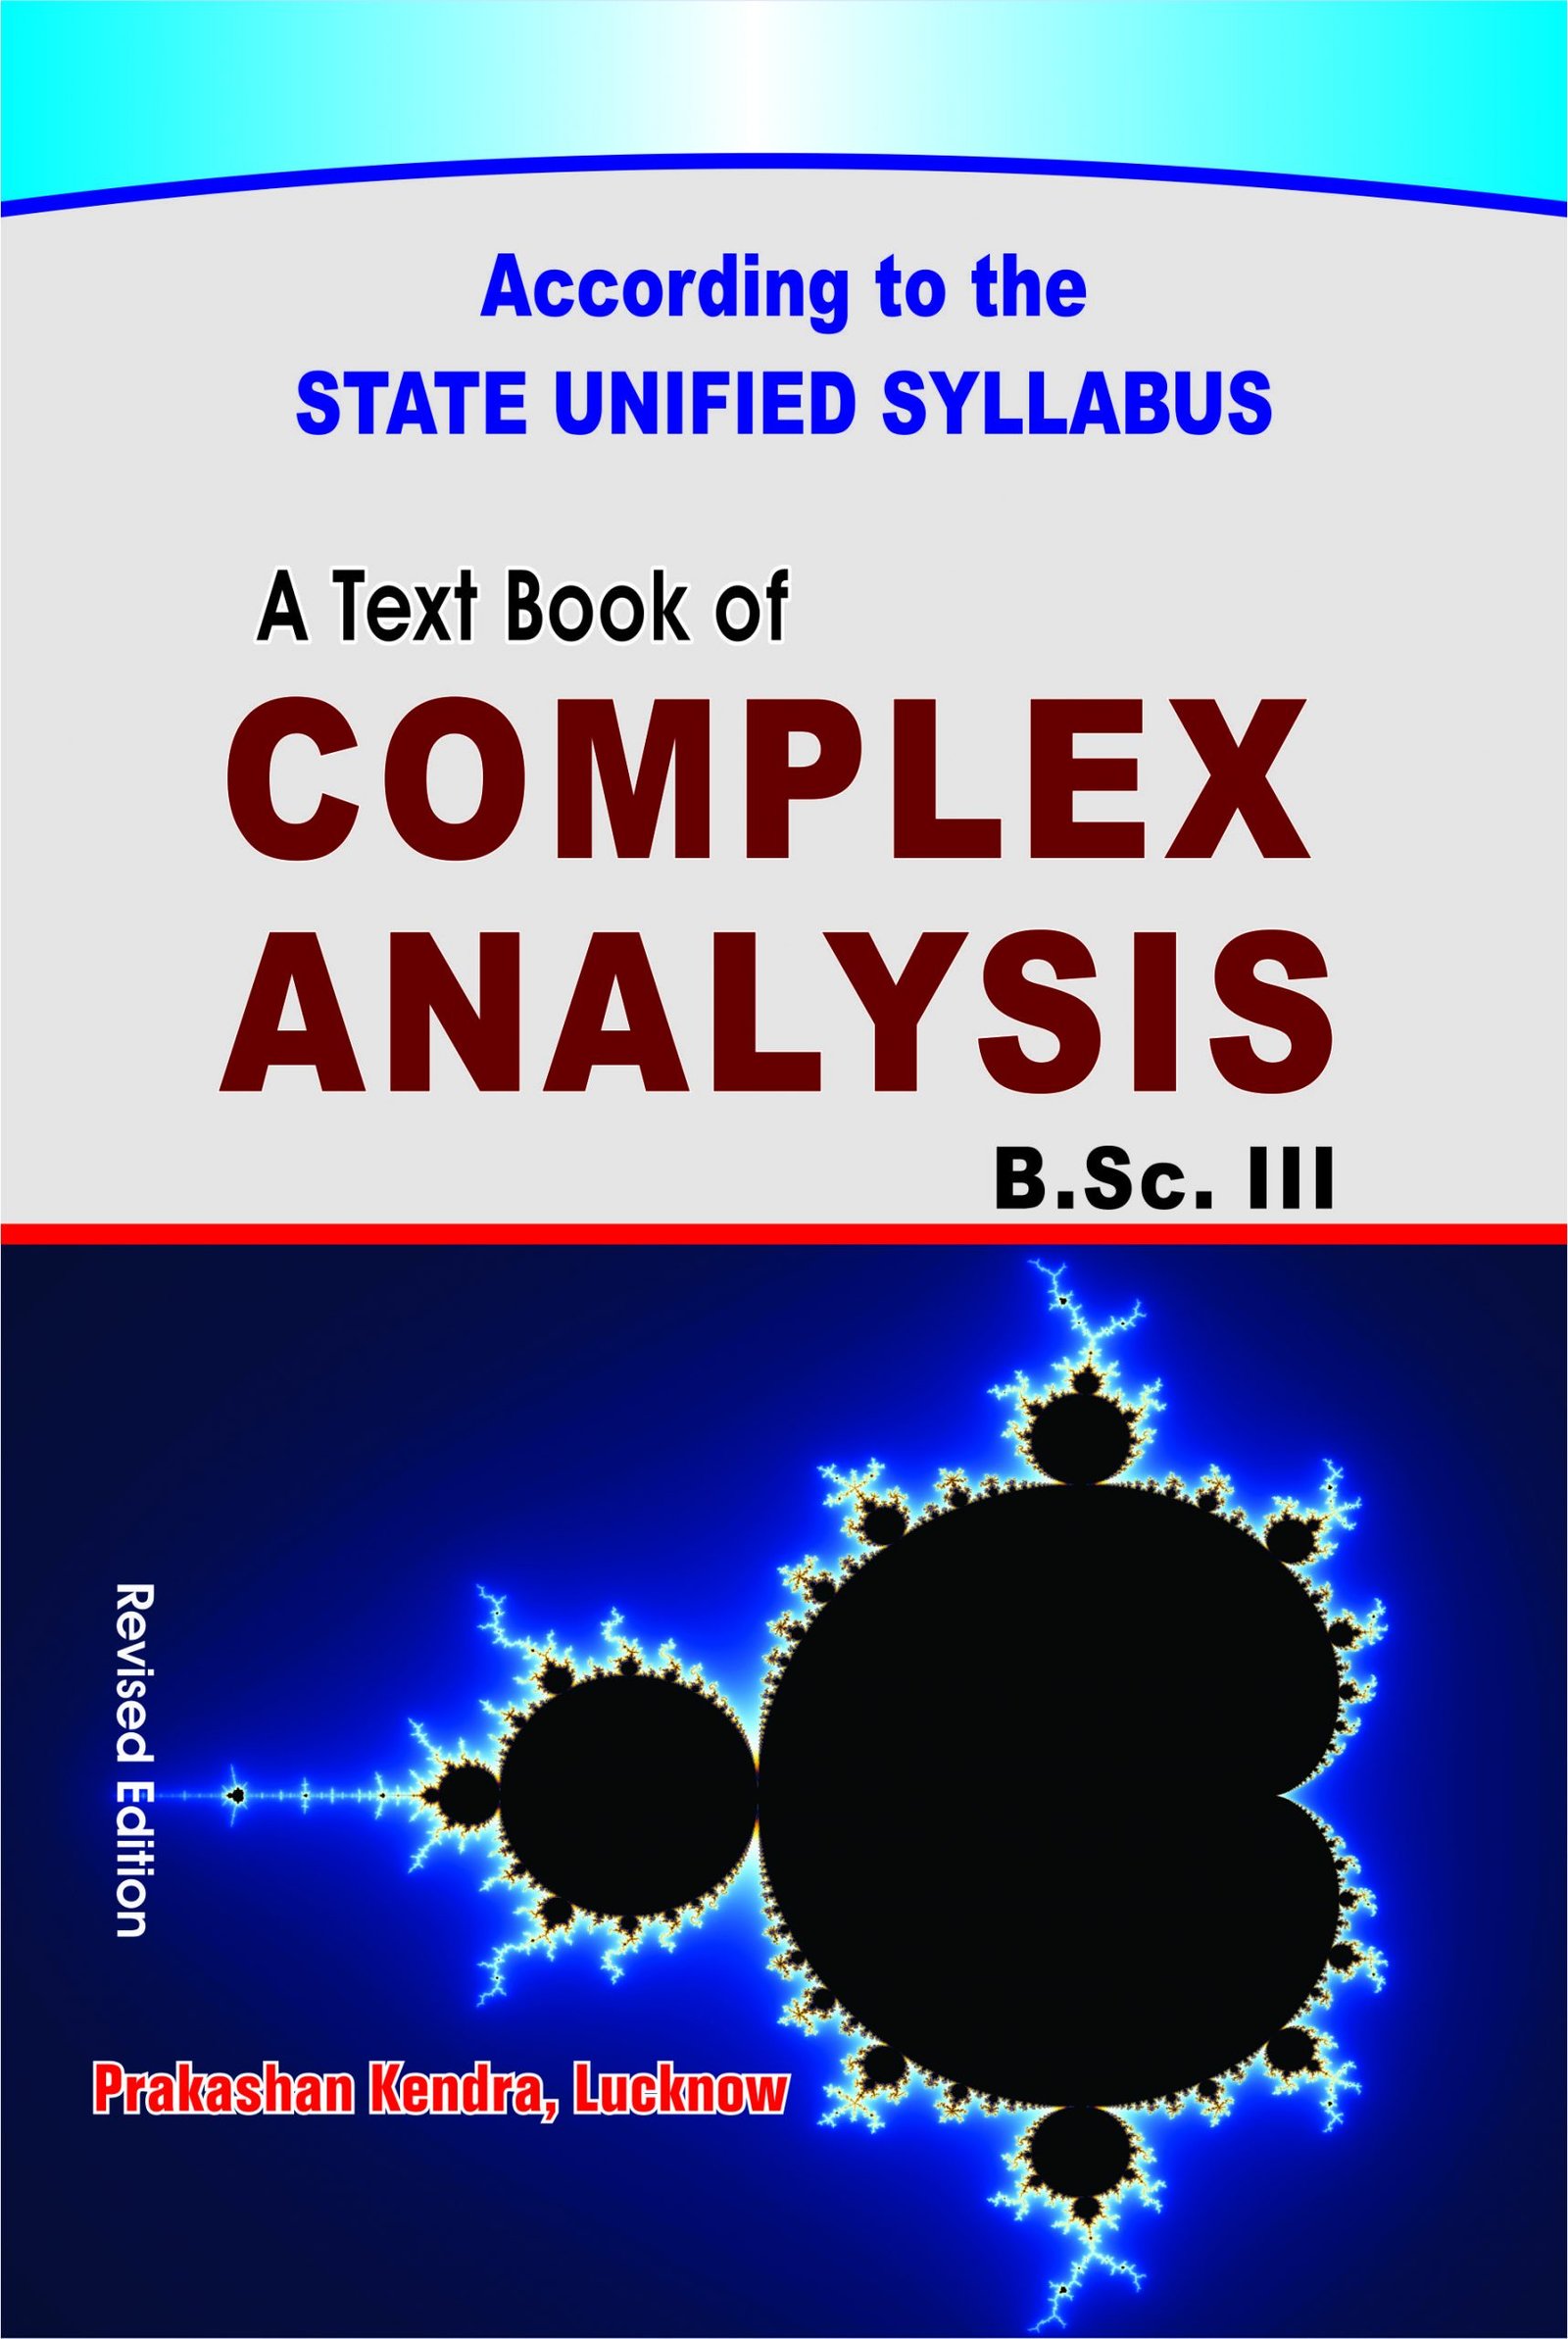 A Text book of Complex Analysis